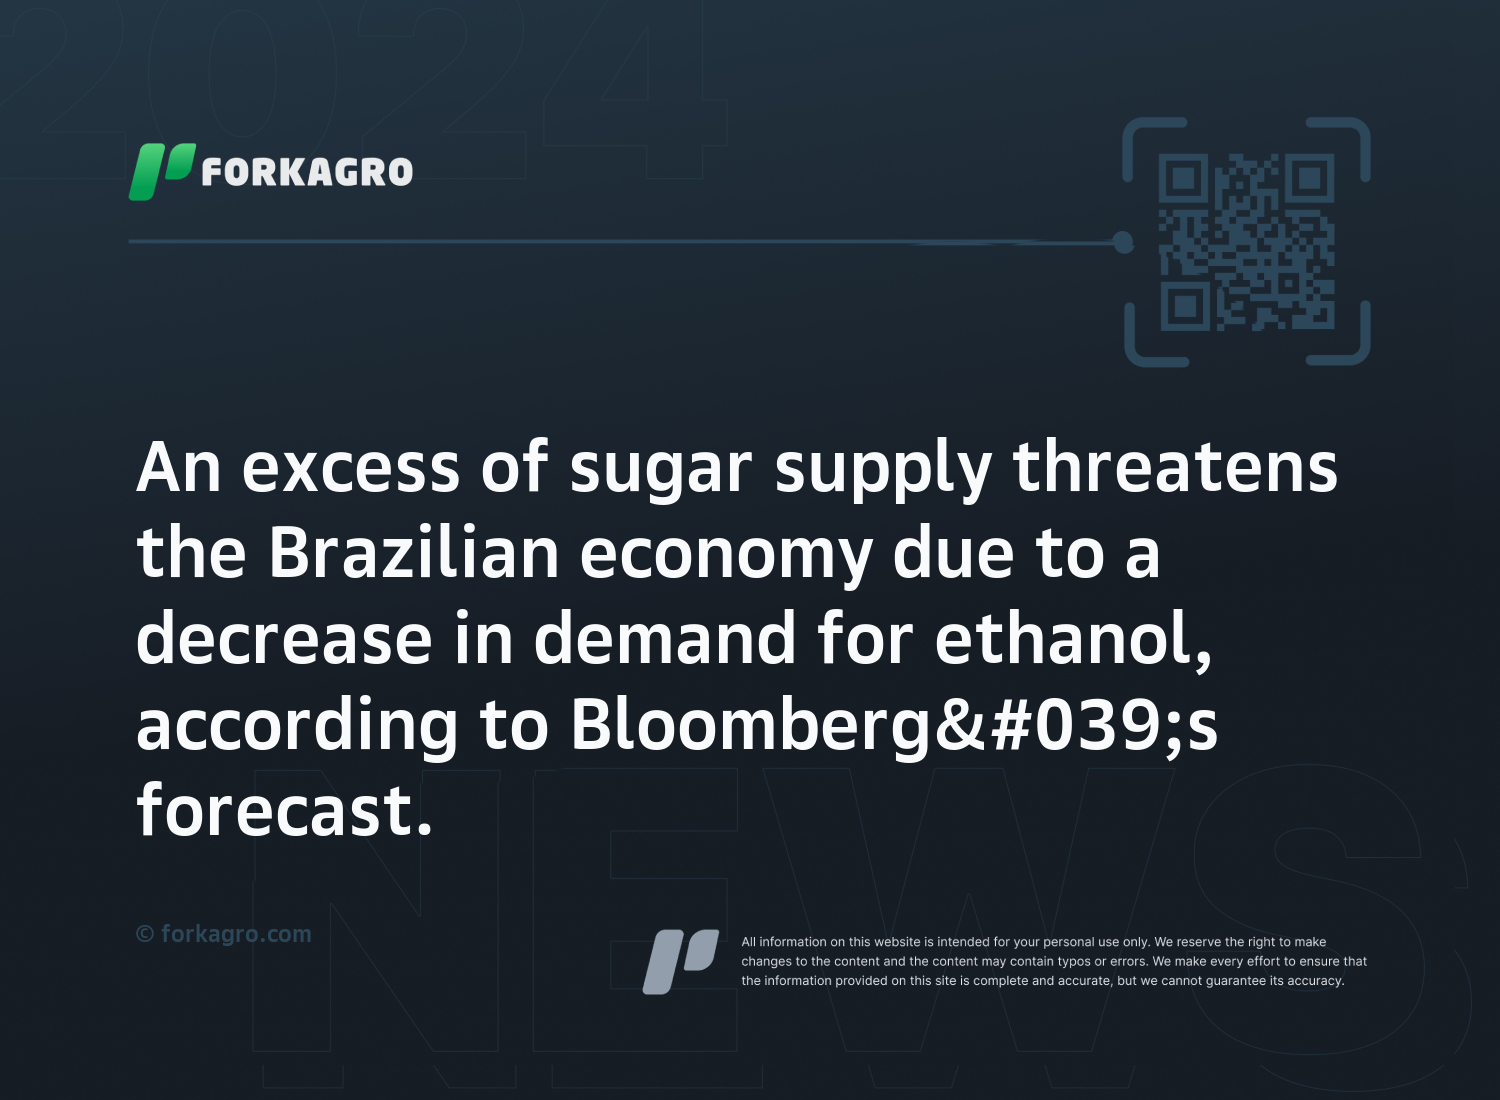 An excess of sugar supply threatens the Brazilian economy due to a decrease in demand for ethanol, according to Bloomberg's forecast.